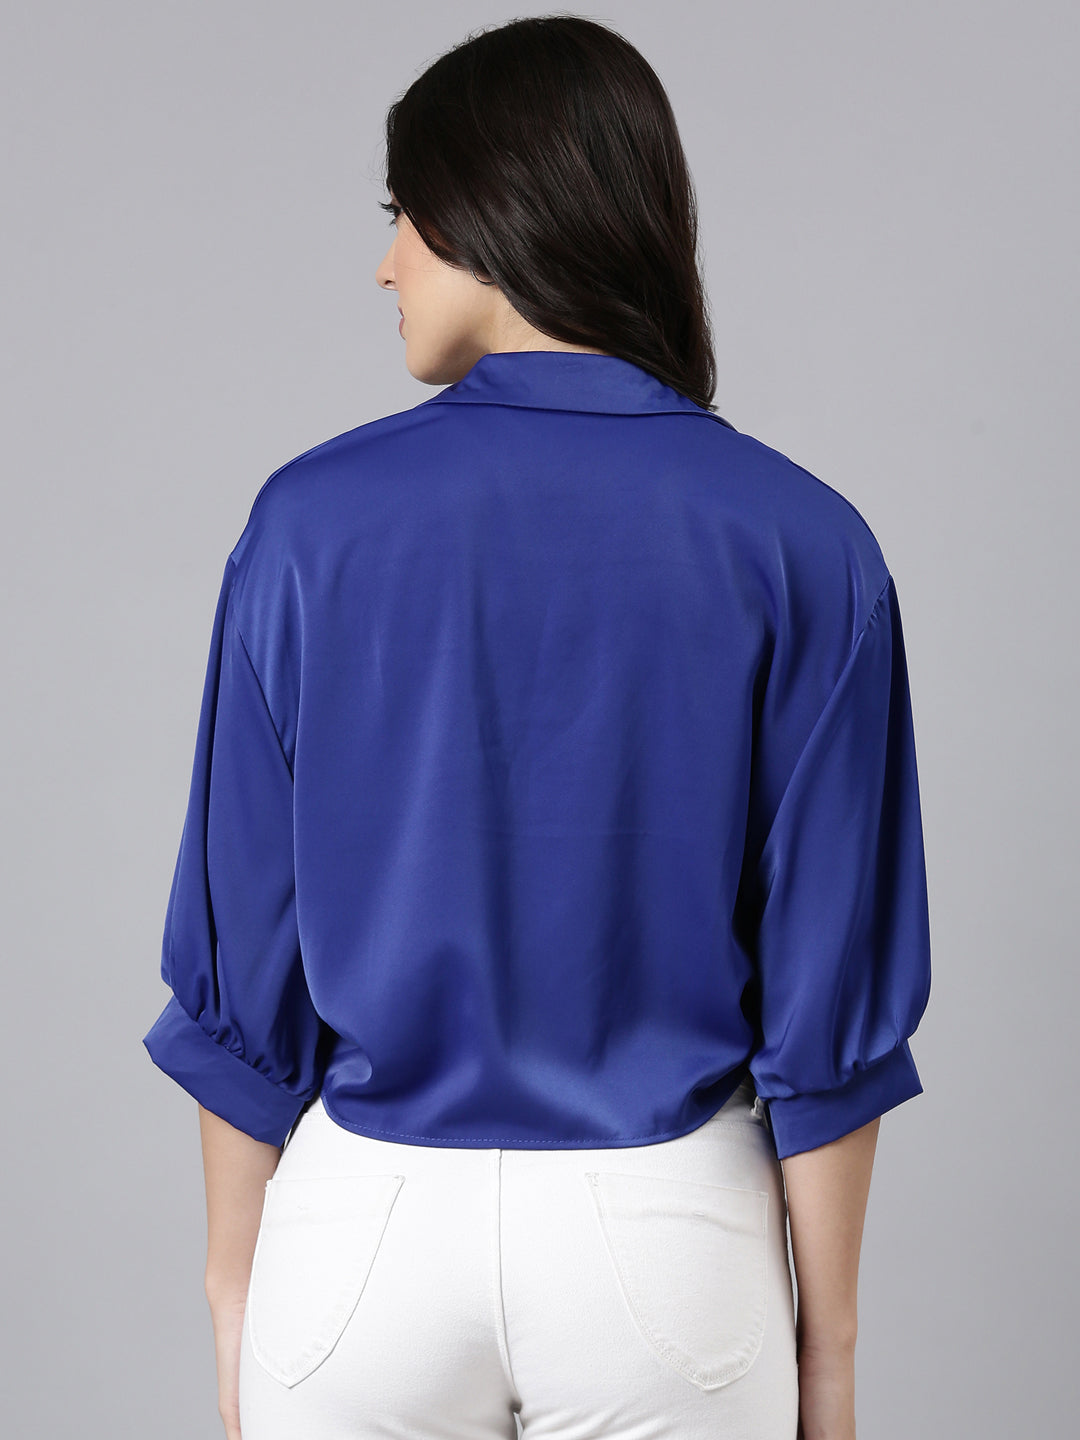 Women Solid Shirt Style Navy Blue Top